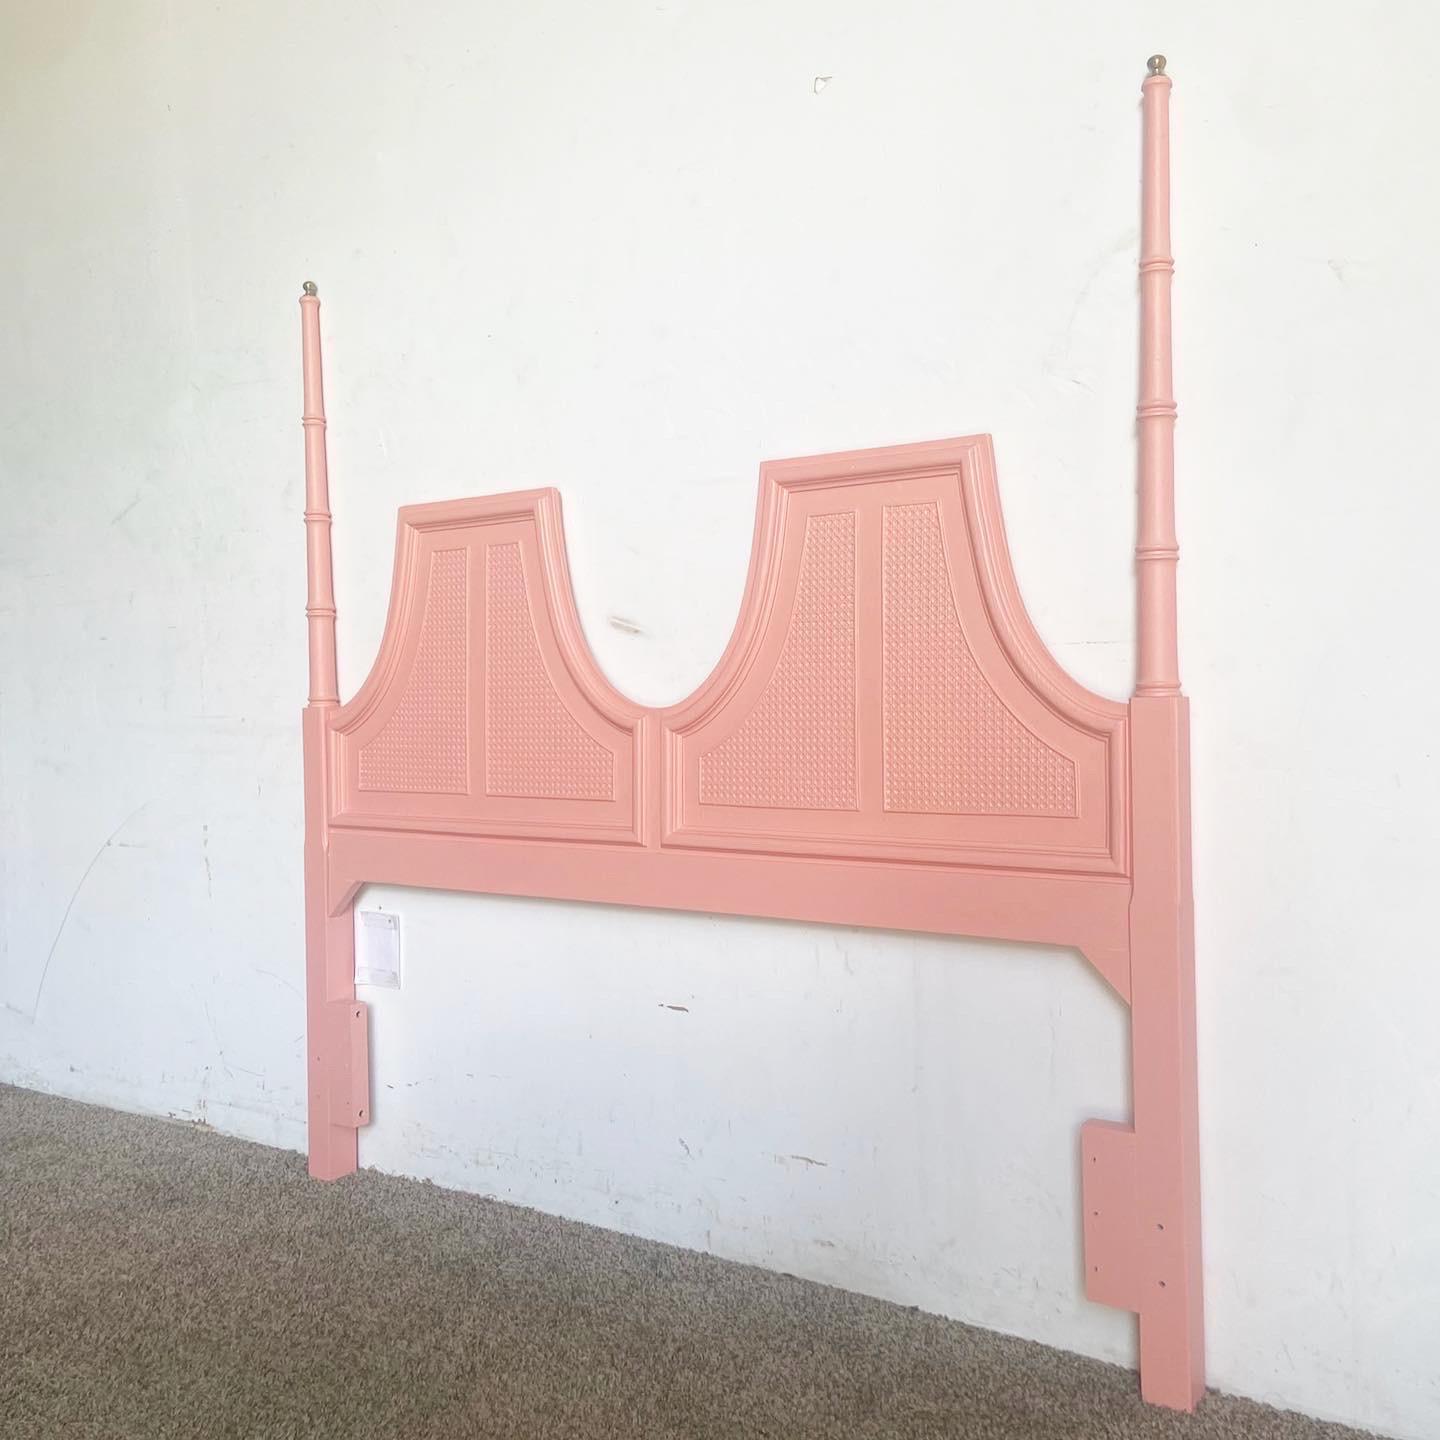 Transform your bedroom with this Regency Pink Faux Cane Queen Headboard With Brass Accents. The headboard features a vibrant hot pink faux cane pattern and elegant brass accents, offering both opulence and whimsy.
Was repainted by previous owner.